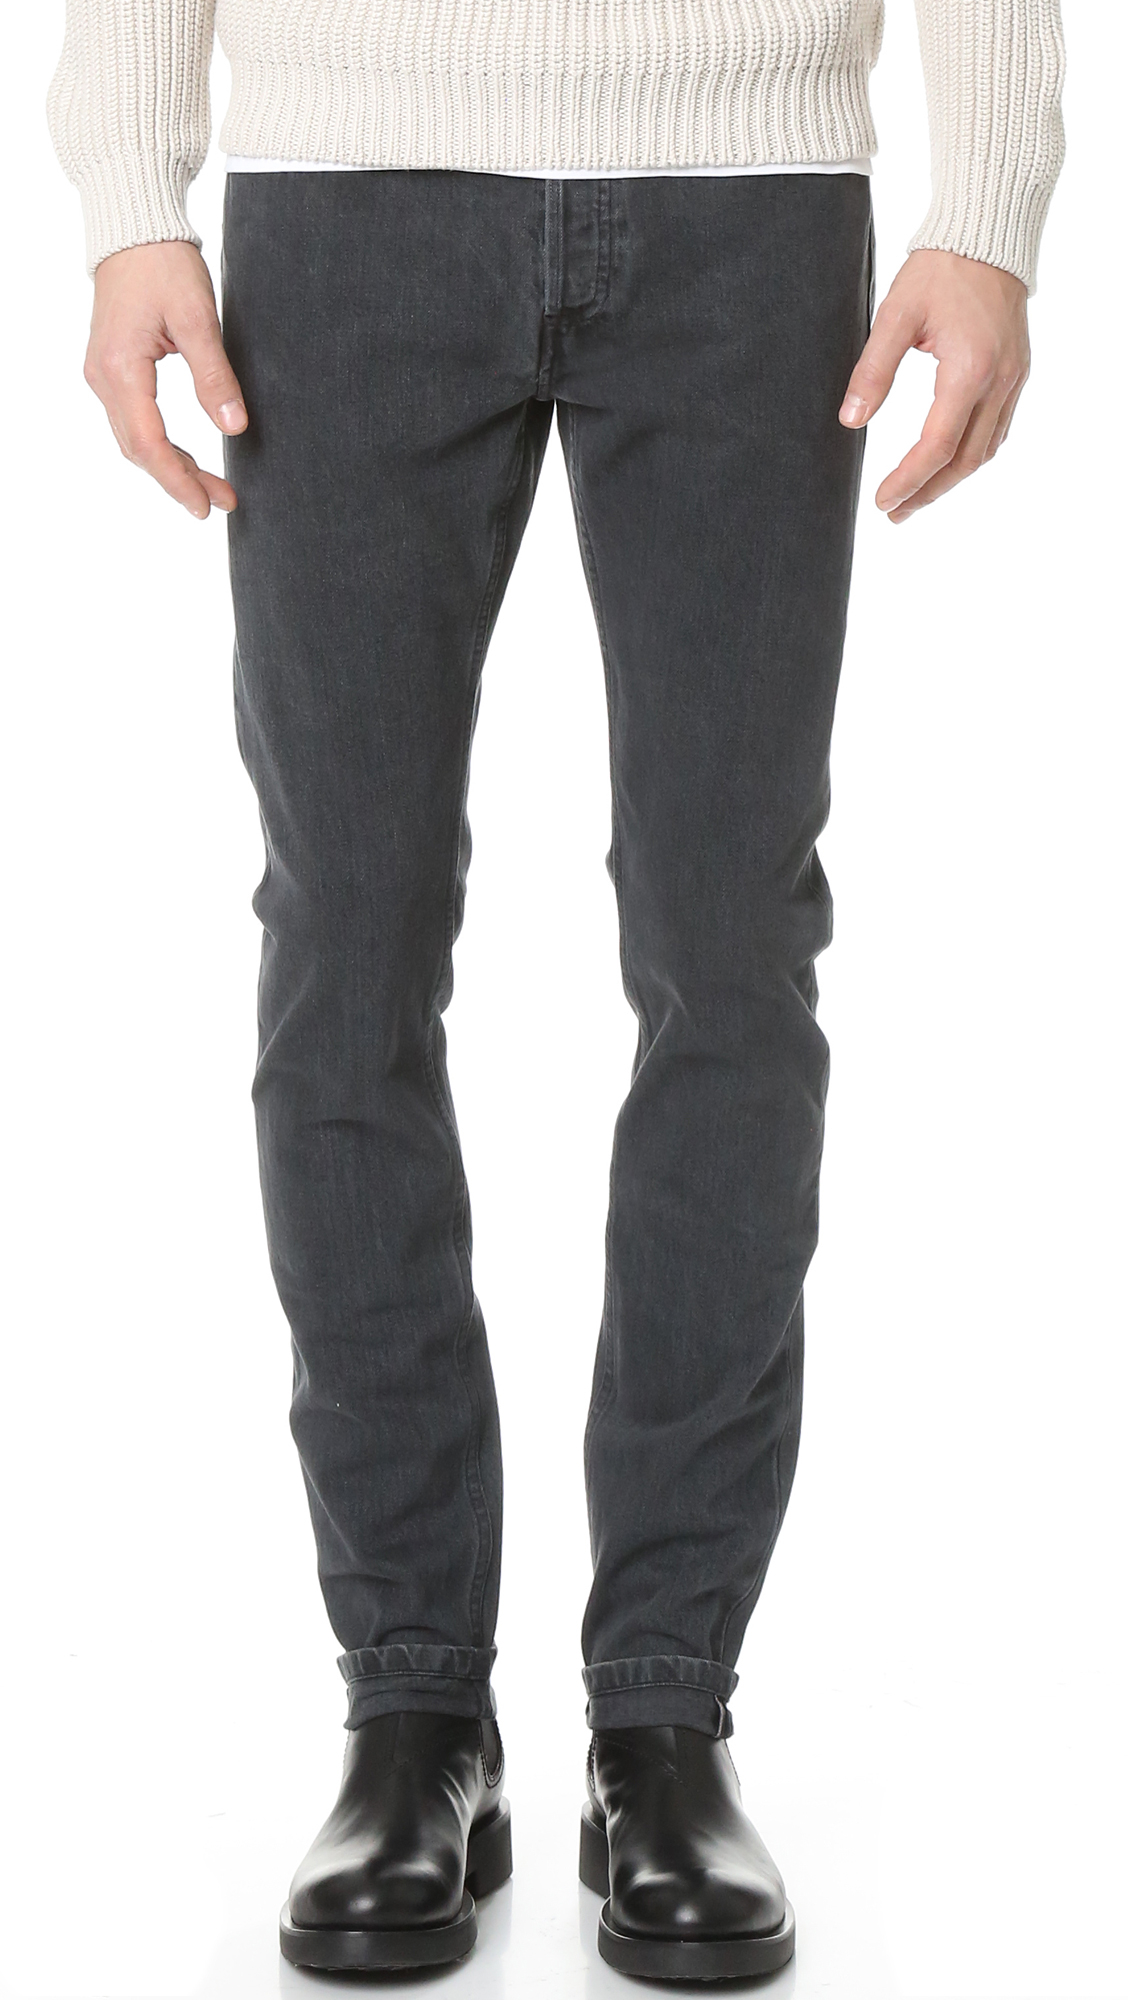 Lyst - A.P.C. Petit New Standard Jeans in Gray for Men